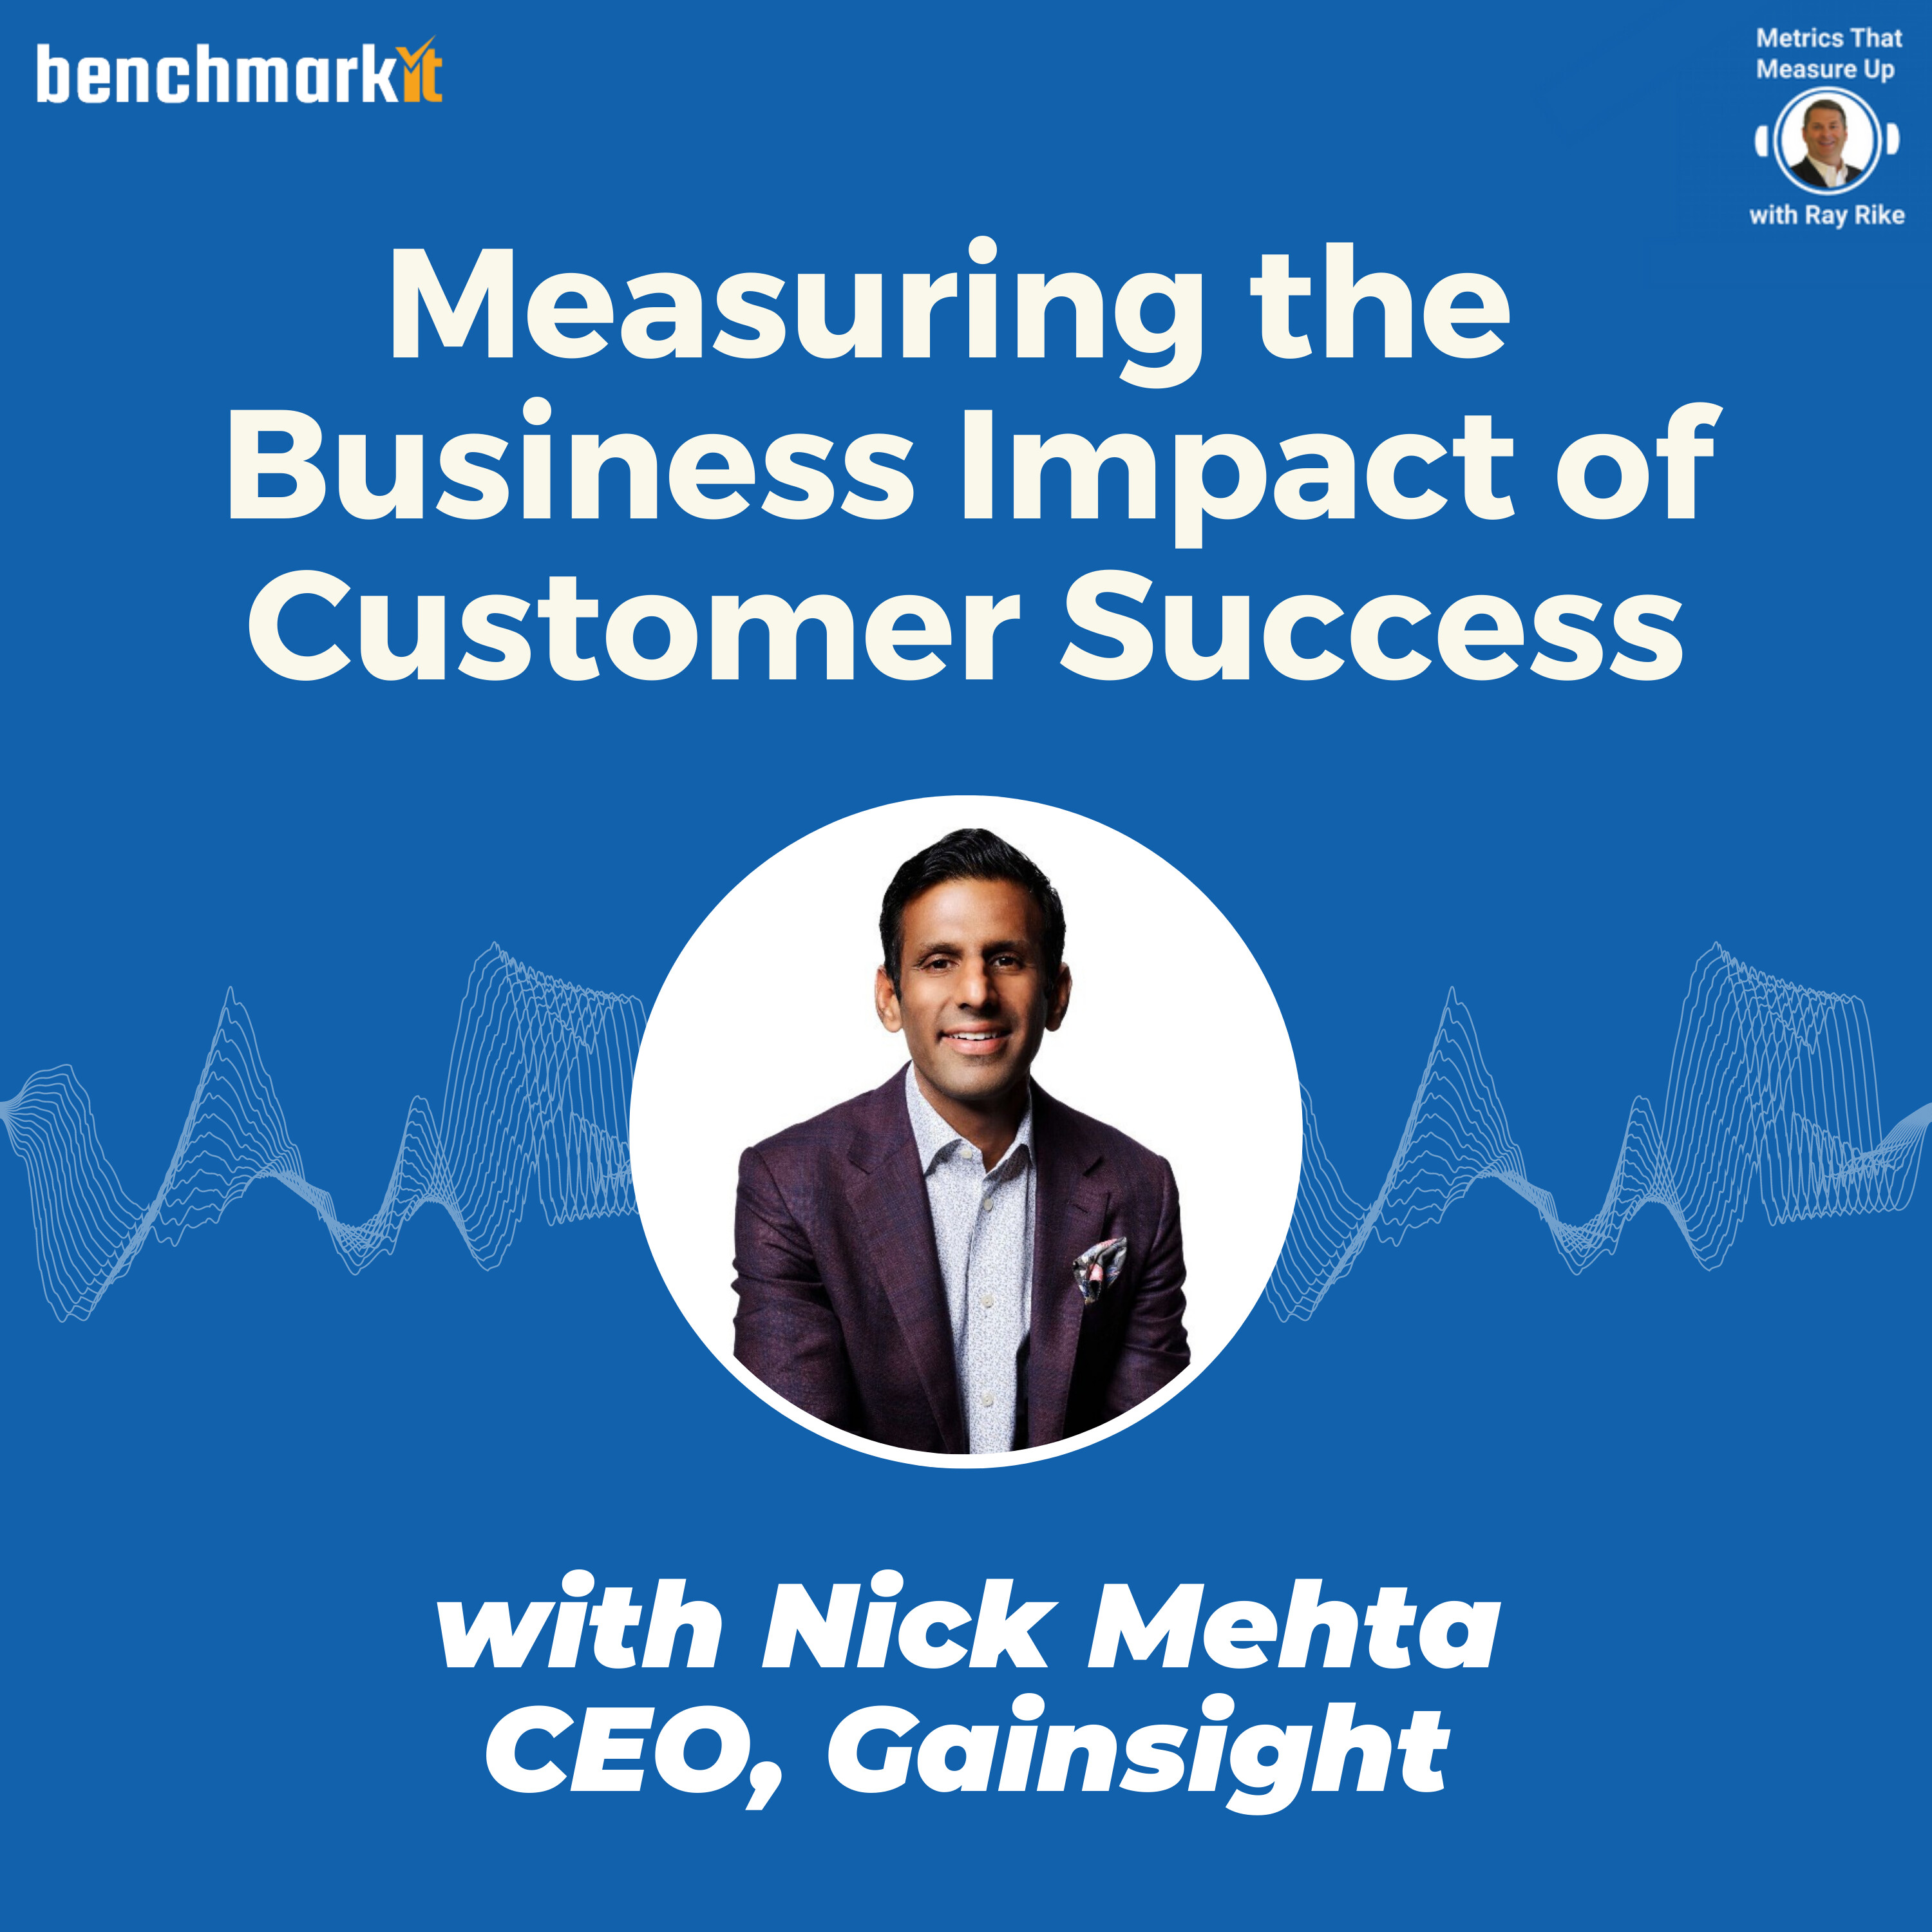 Customer Success and its Business Impact - with Nick Mehta, CEO Gainsight